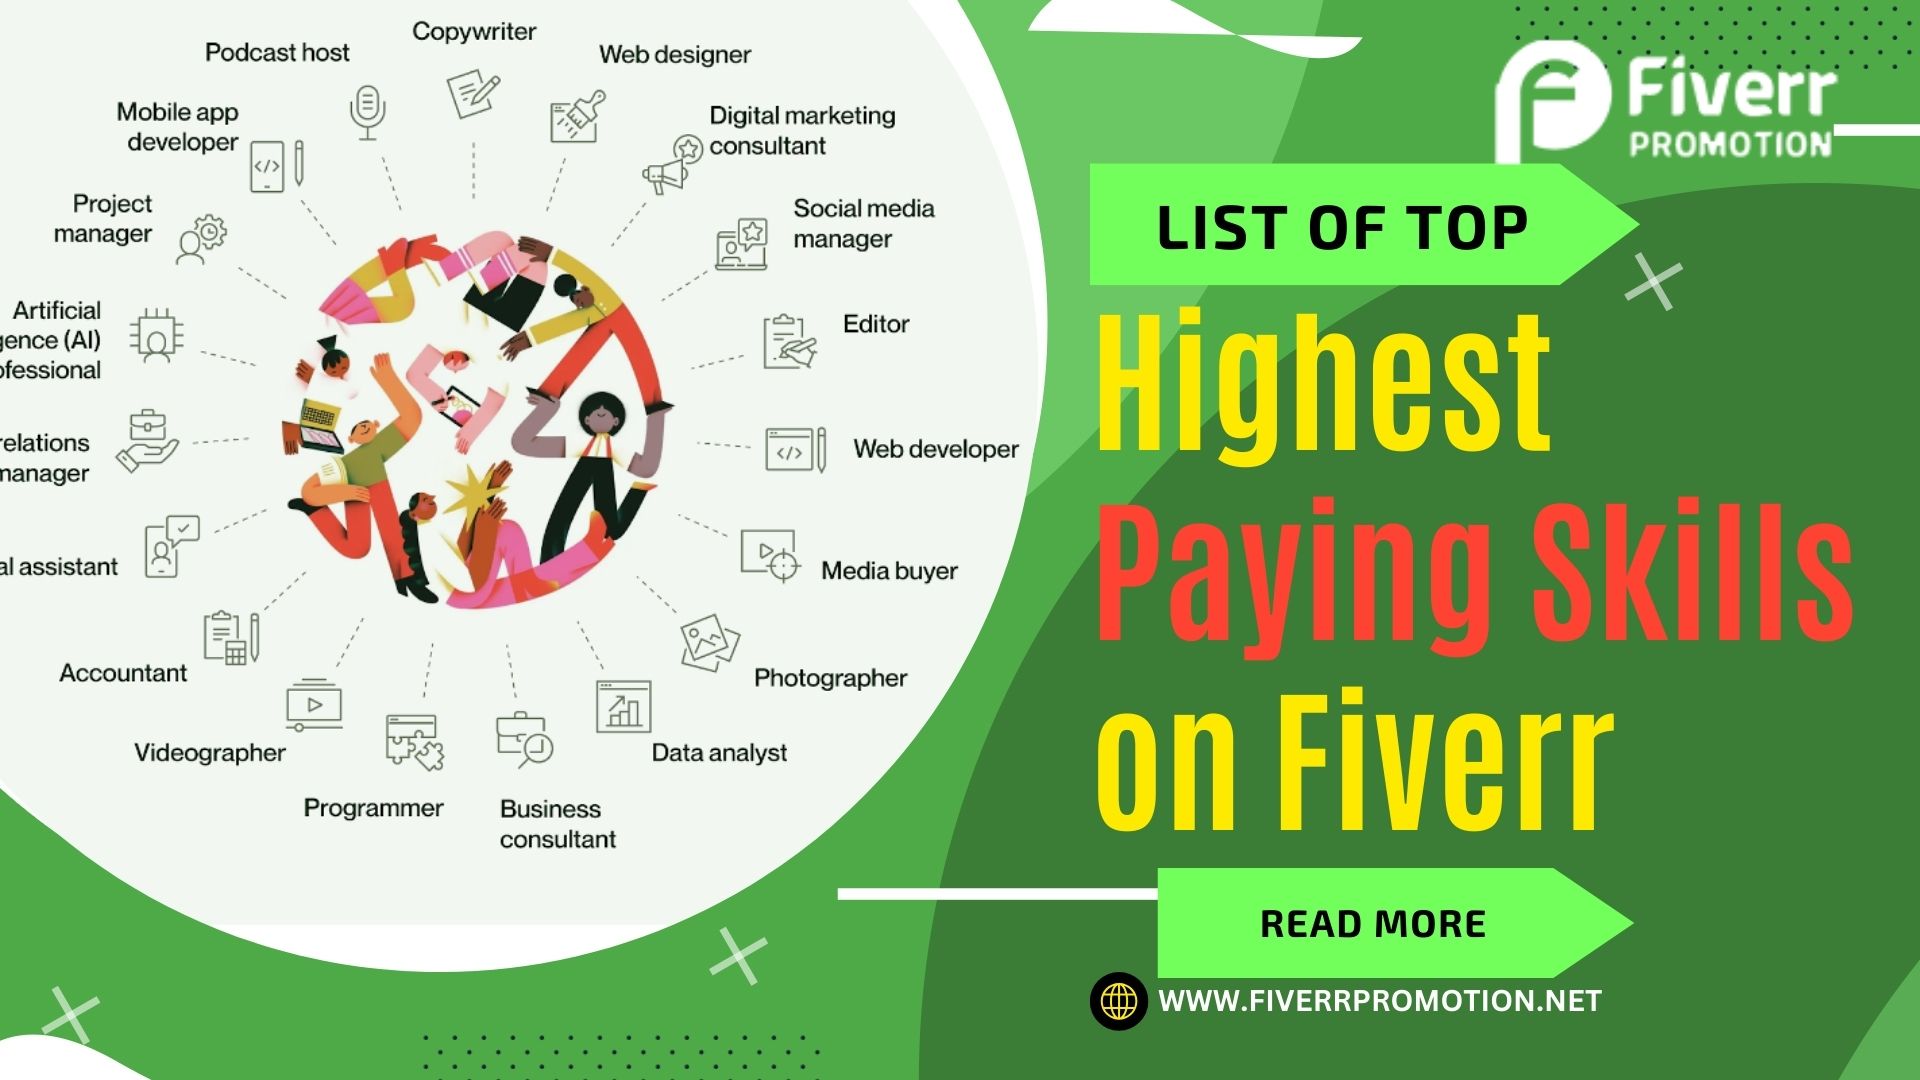 List of Top Highest Paying Skills on Fiverr